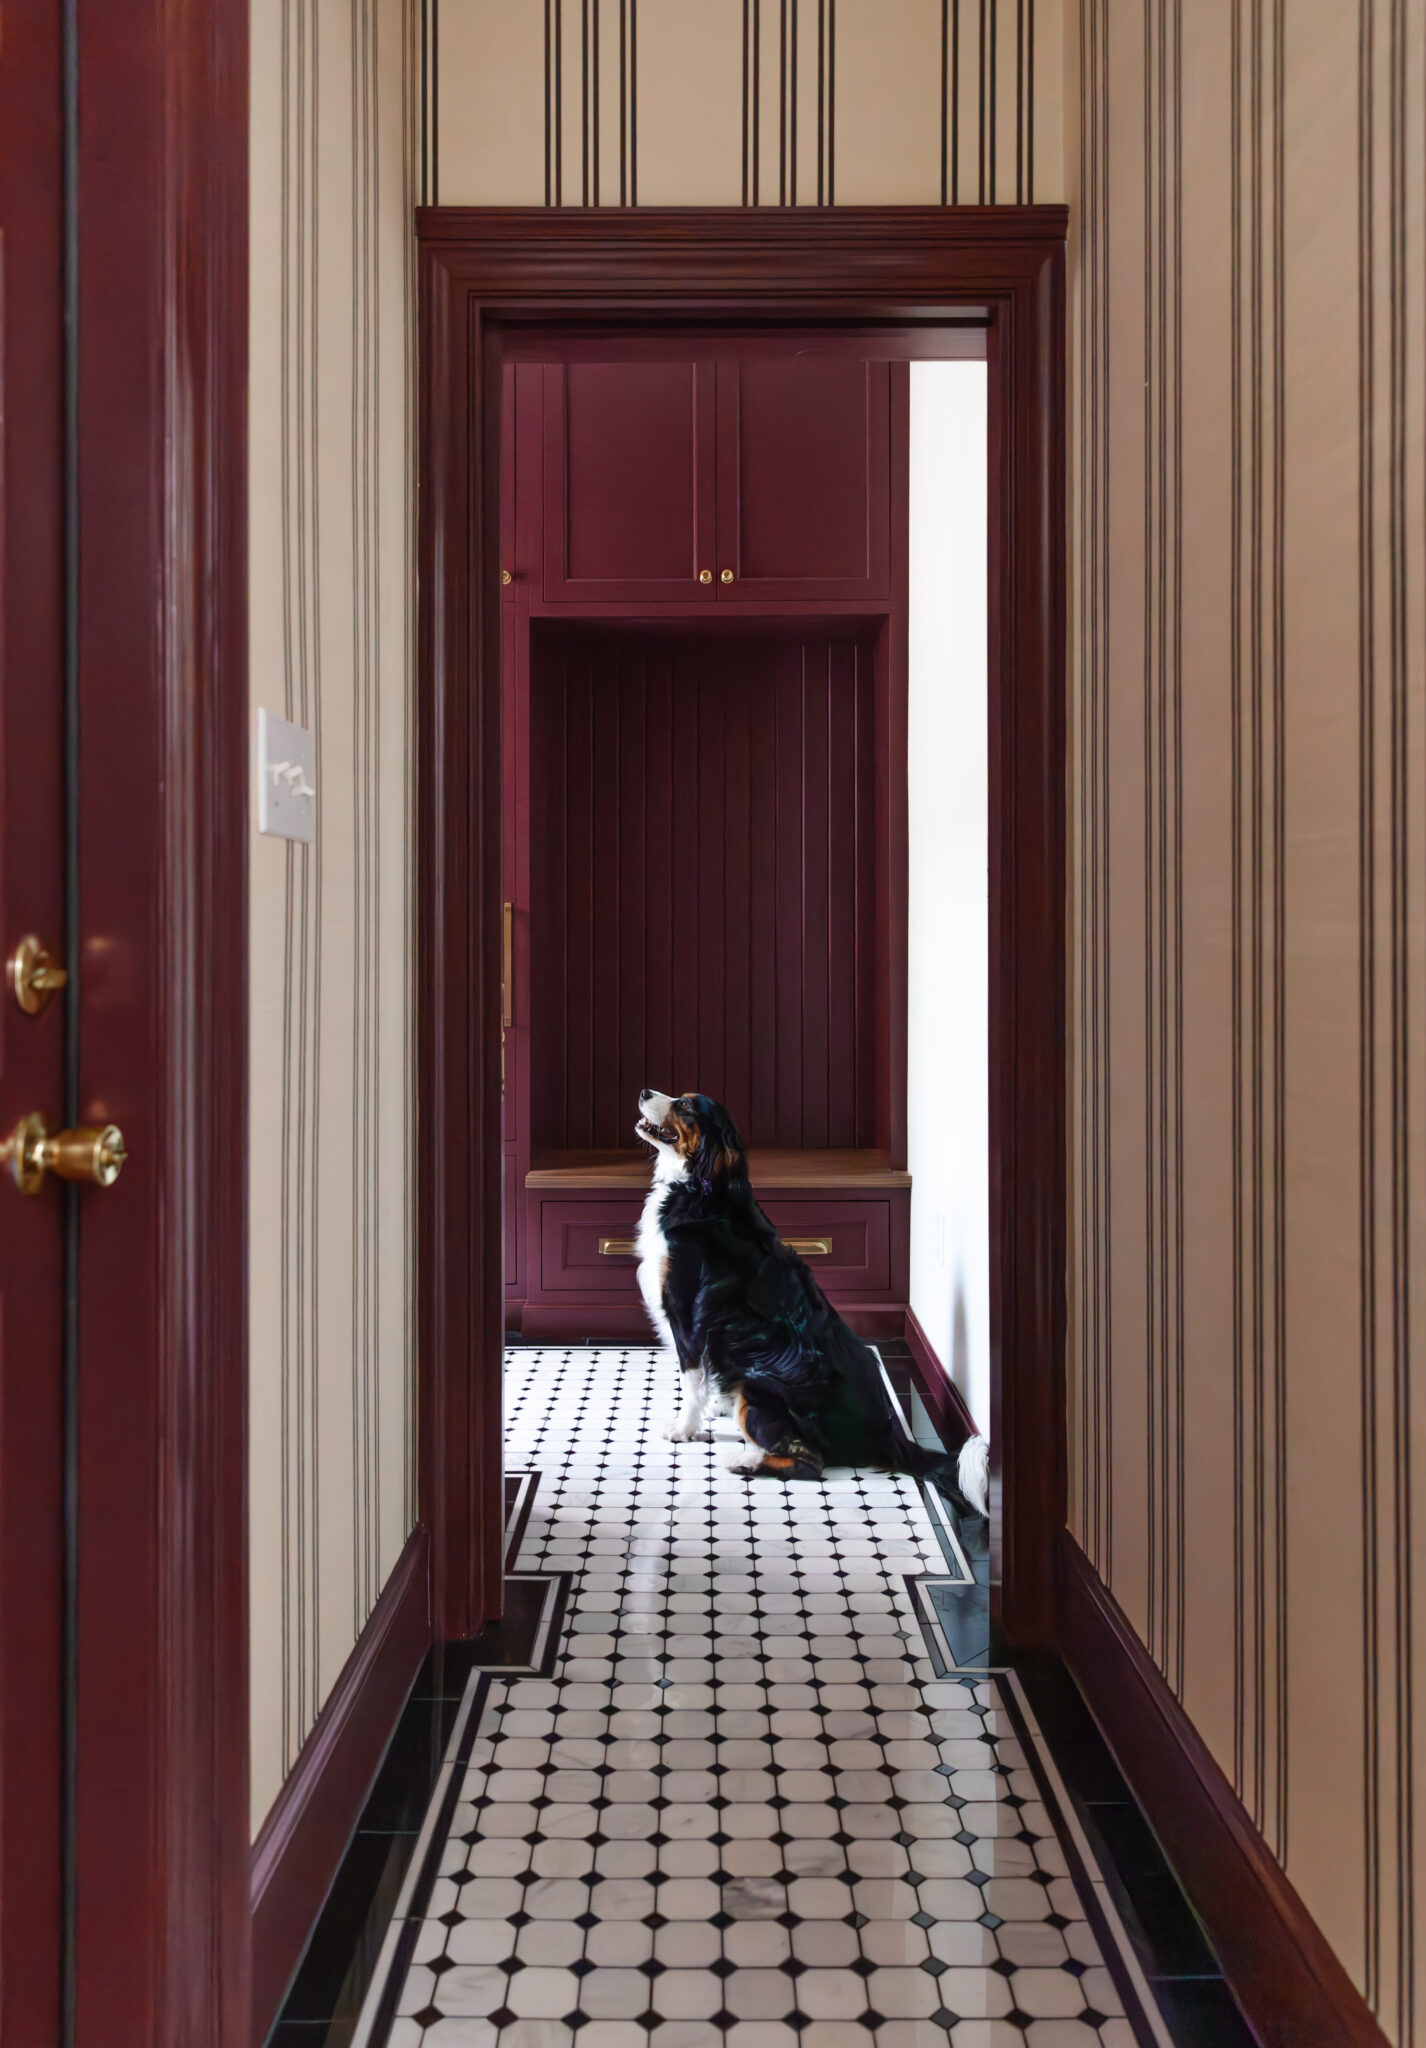 Chris Loves Julia | Mudroom hallway with grasscloth wallpaper, tiled floor and red trim